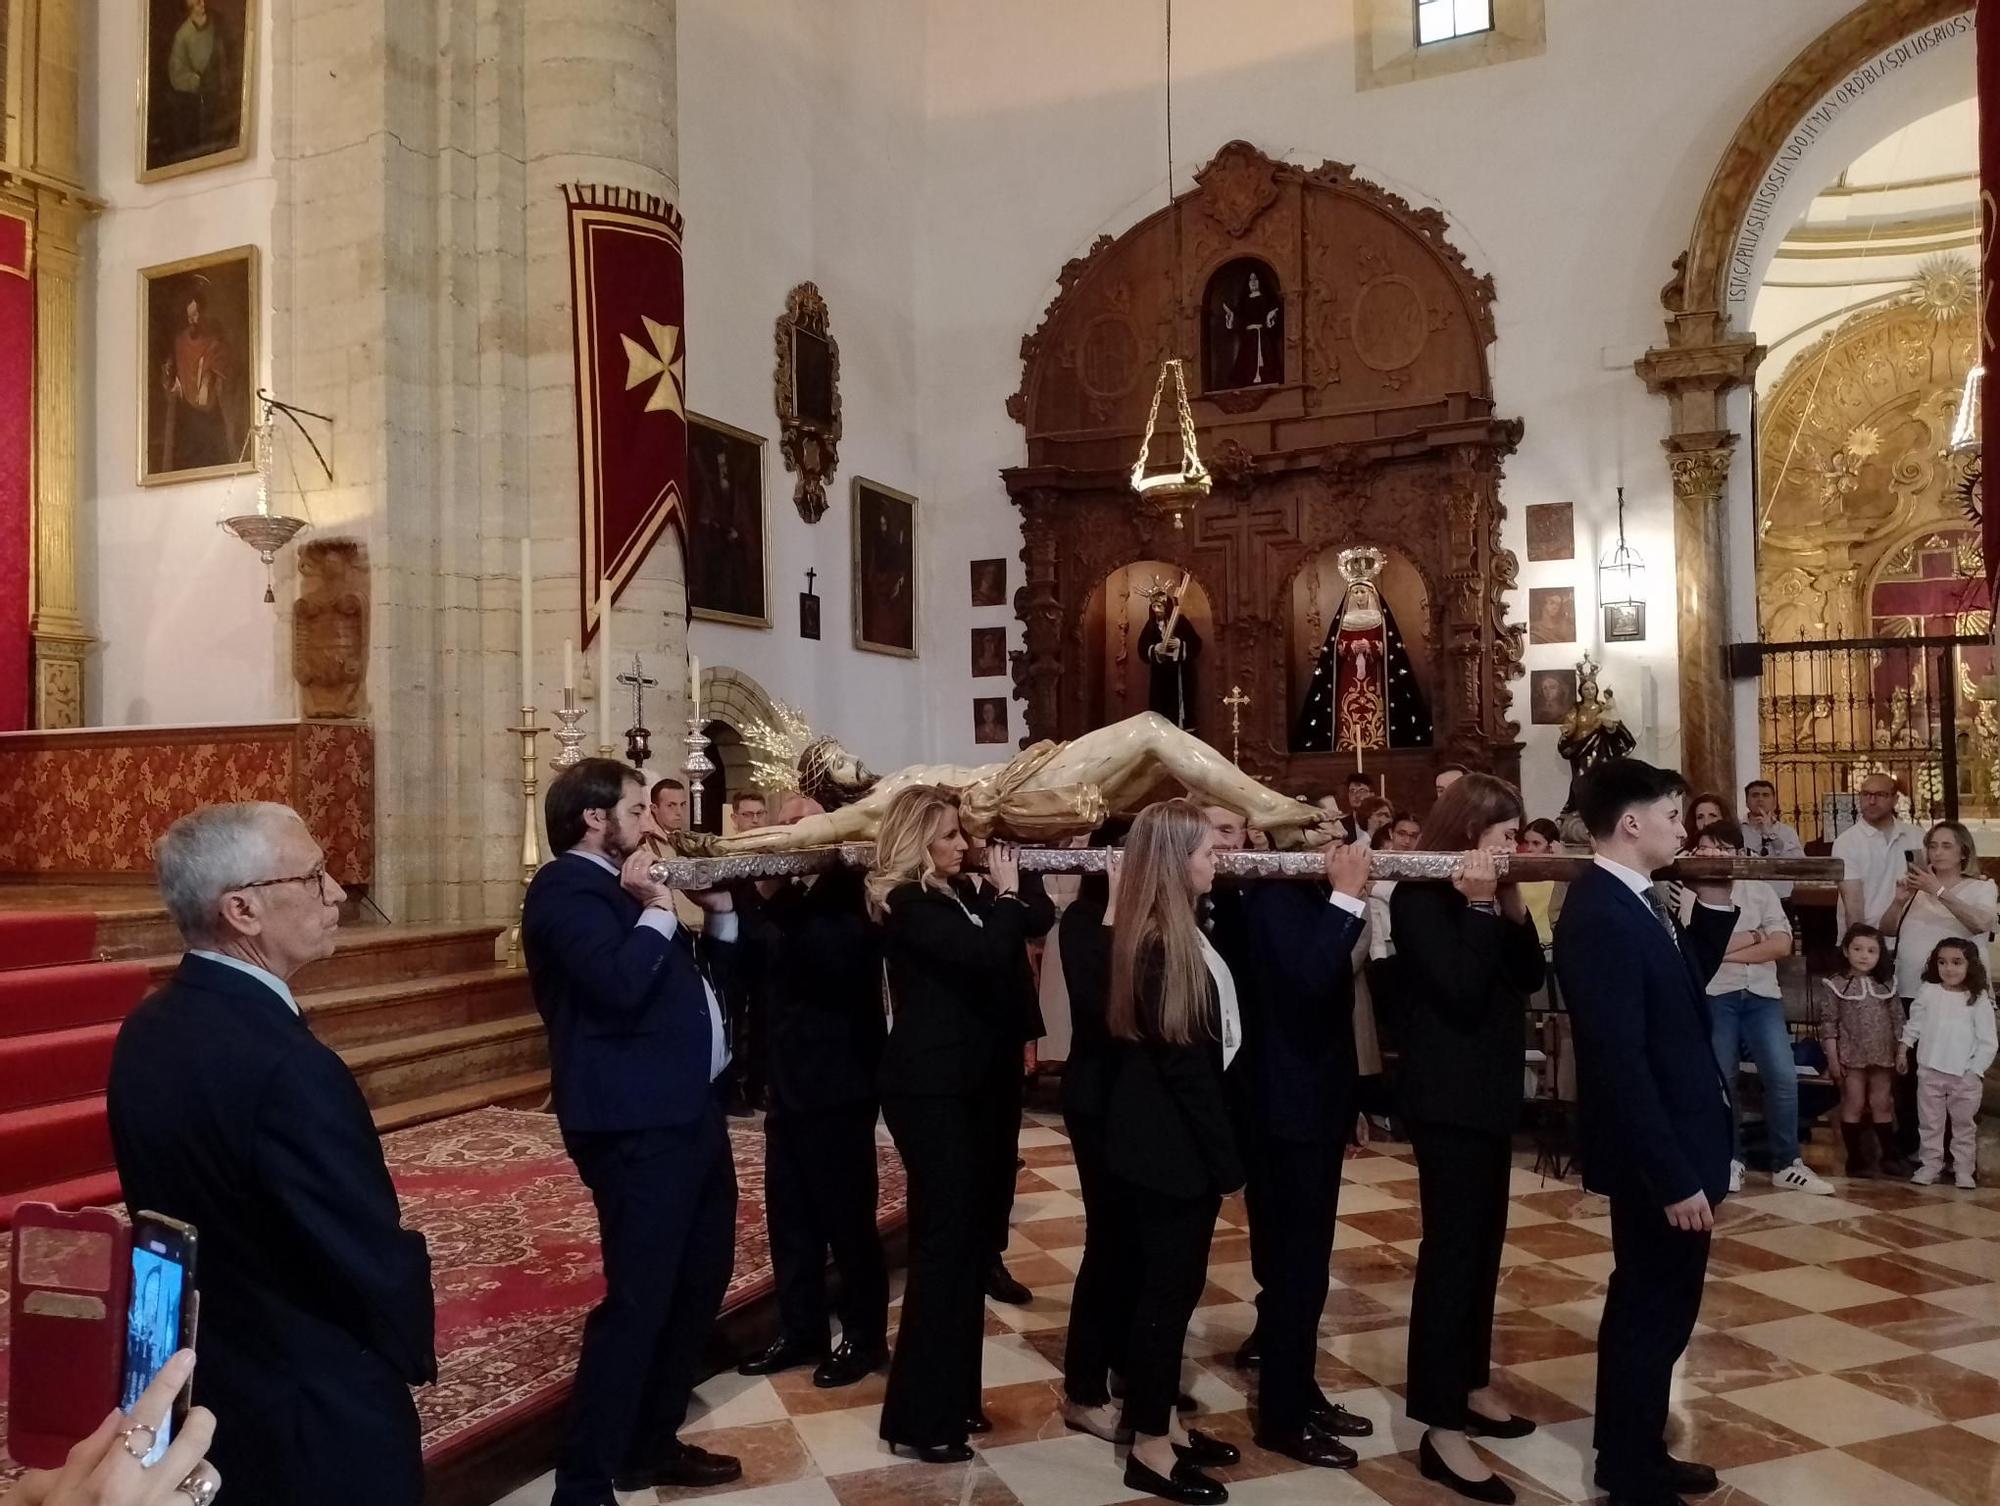 Transfer of the lord of health and the waters of antequera for his ninth